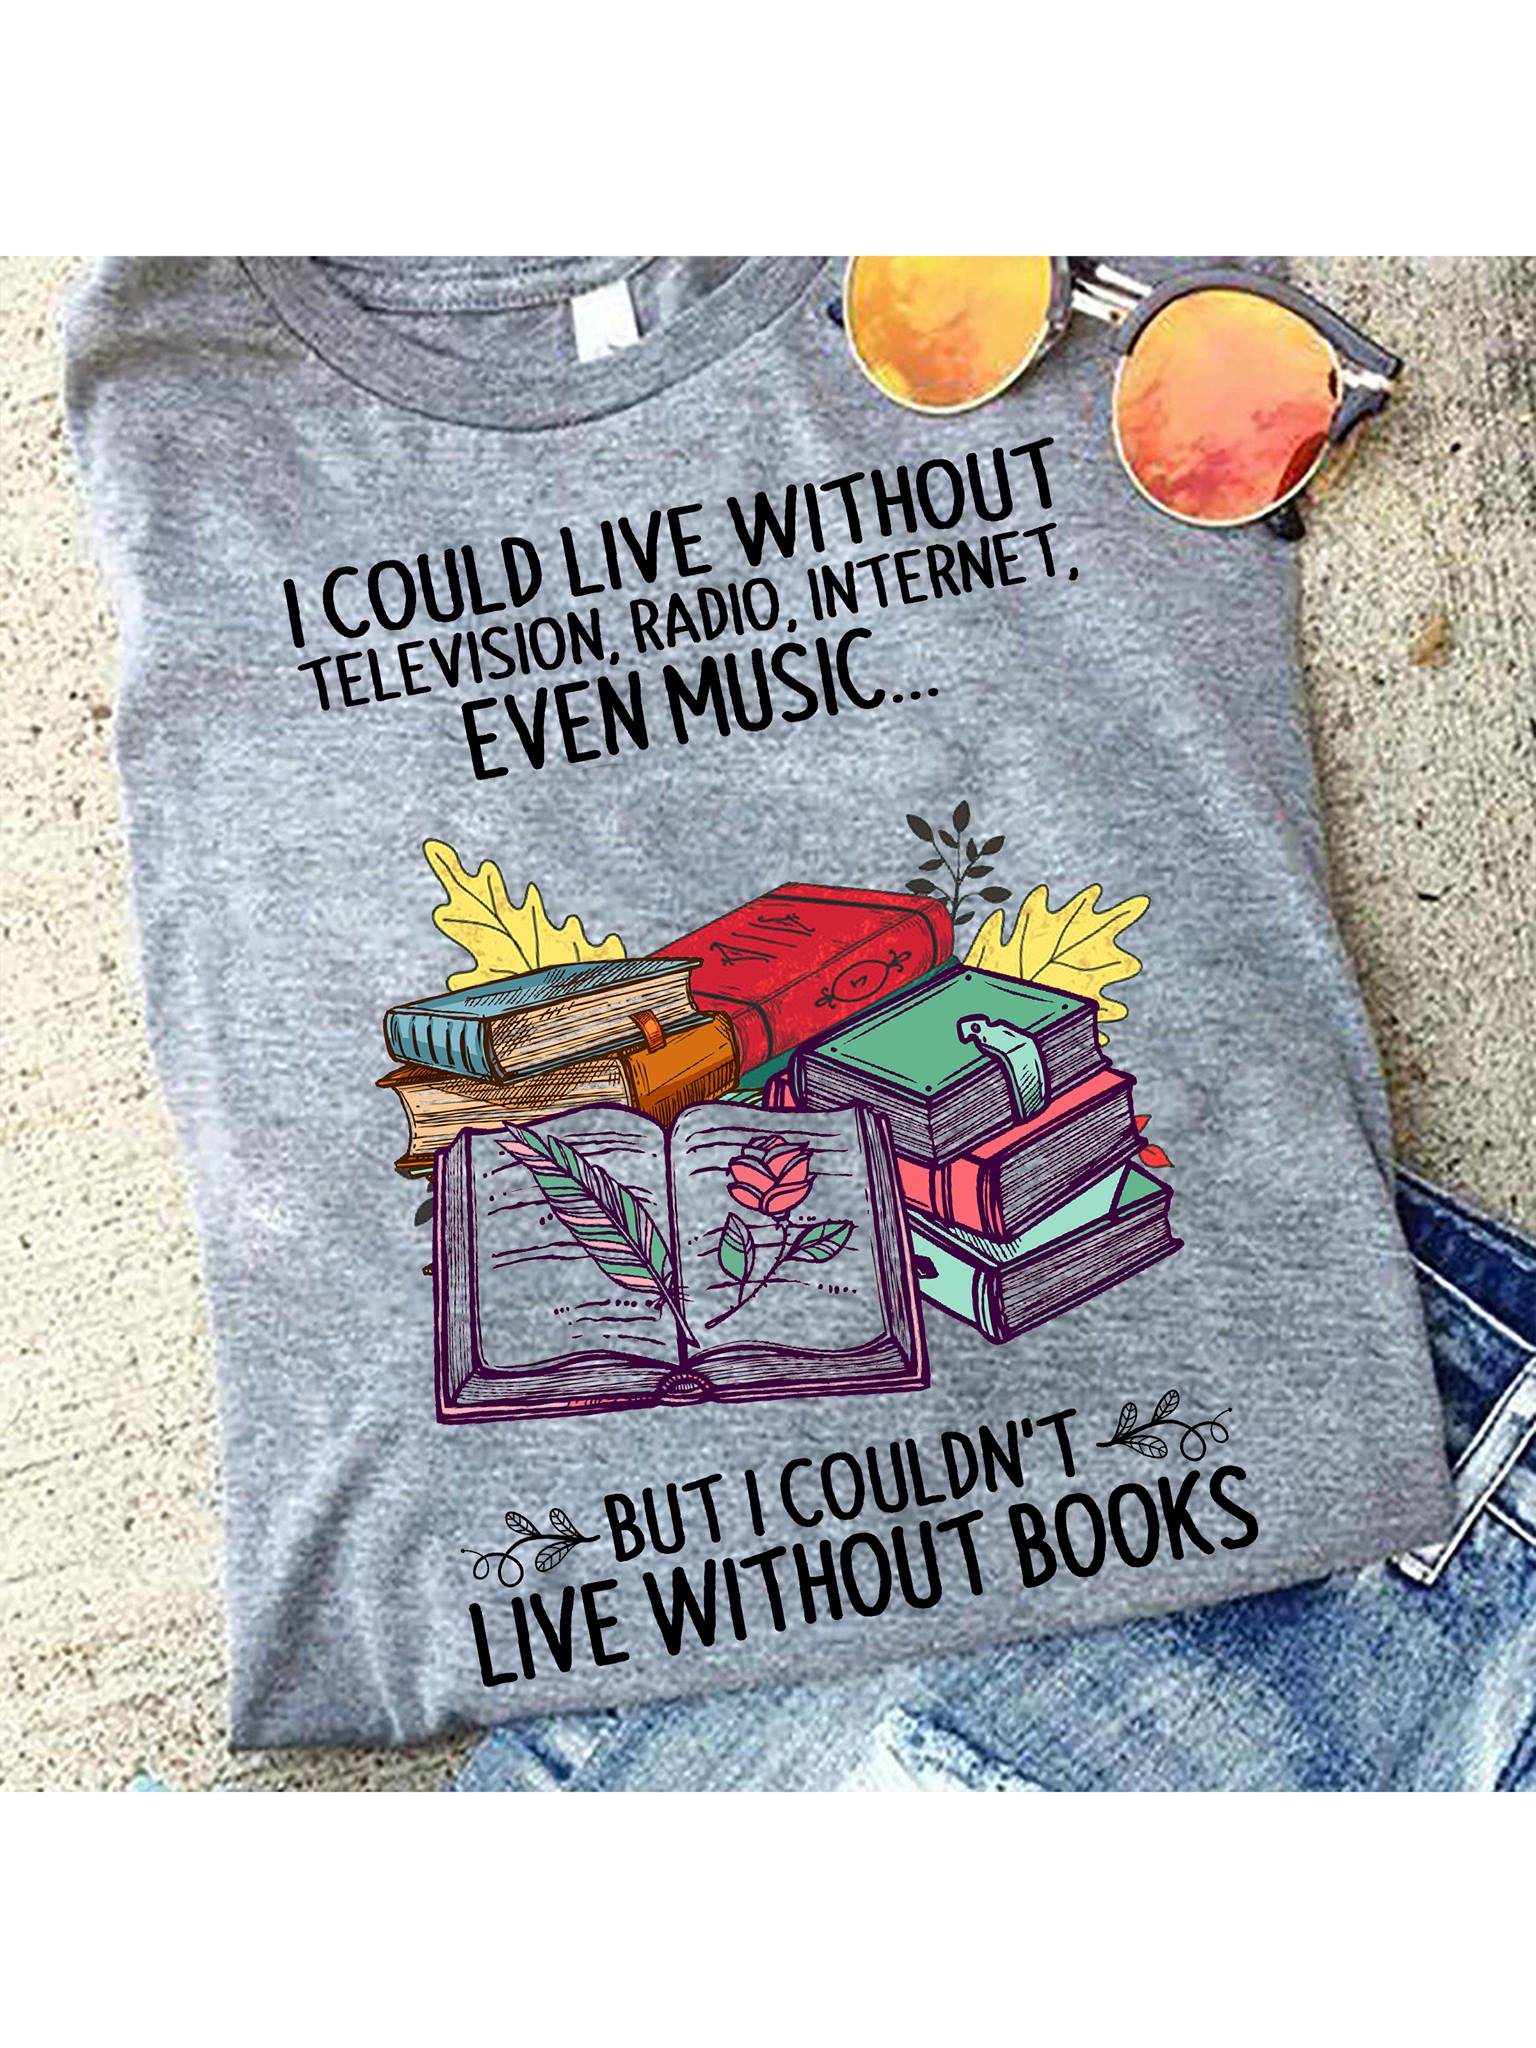 I could live without television and internet but I couldn't live without books